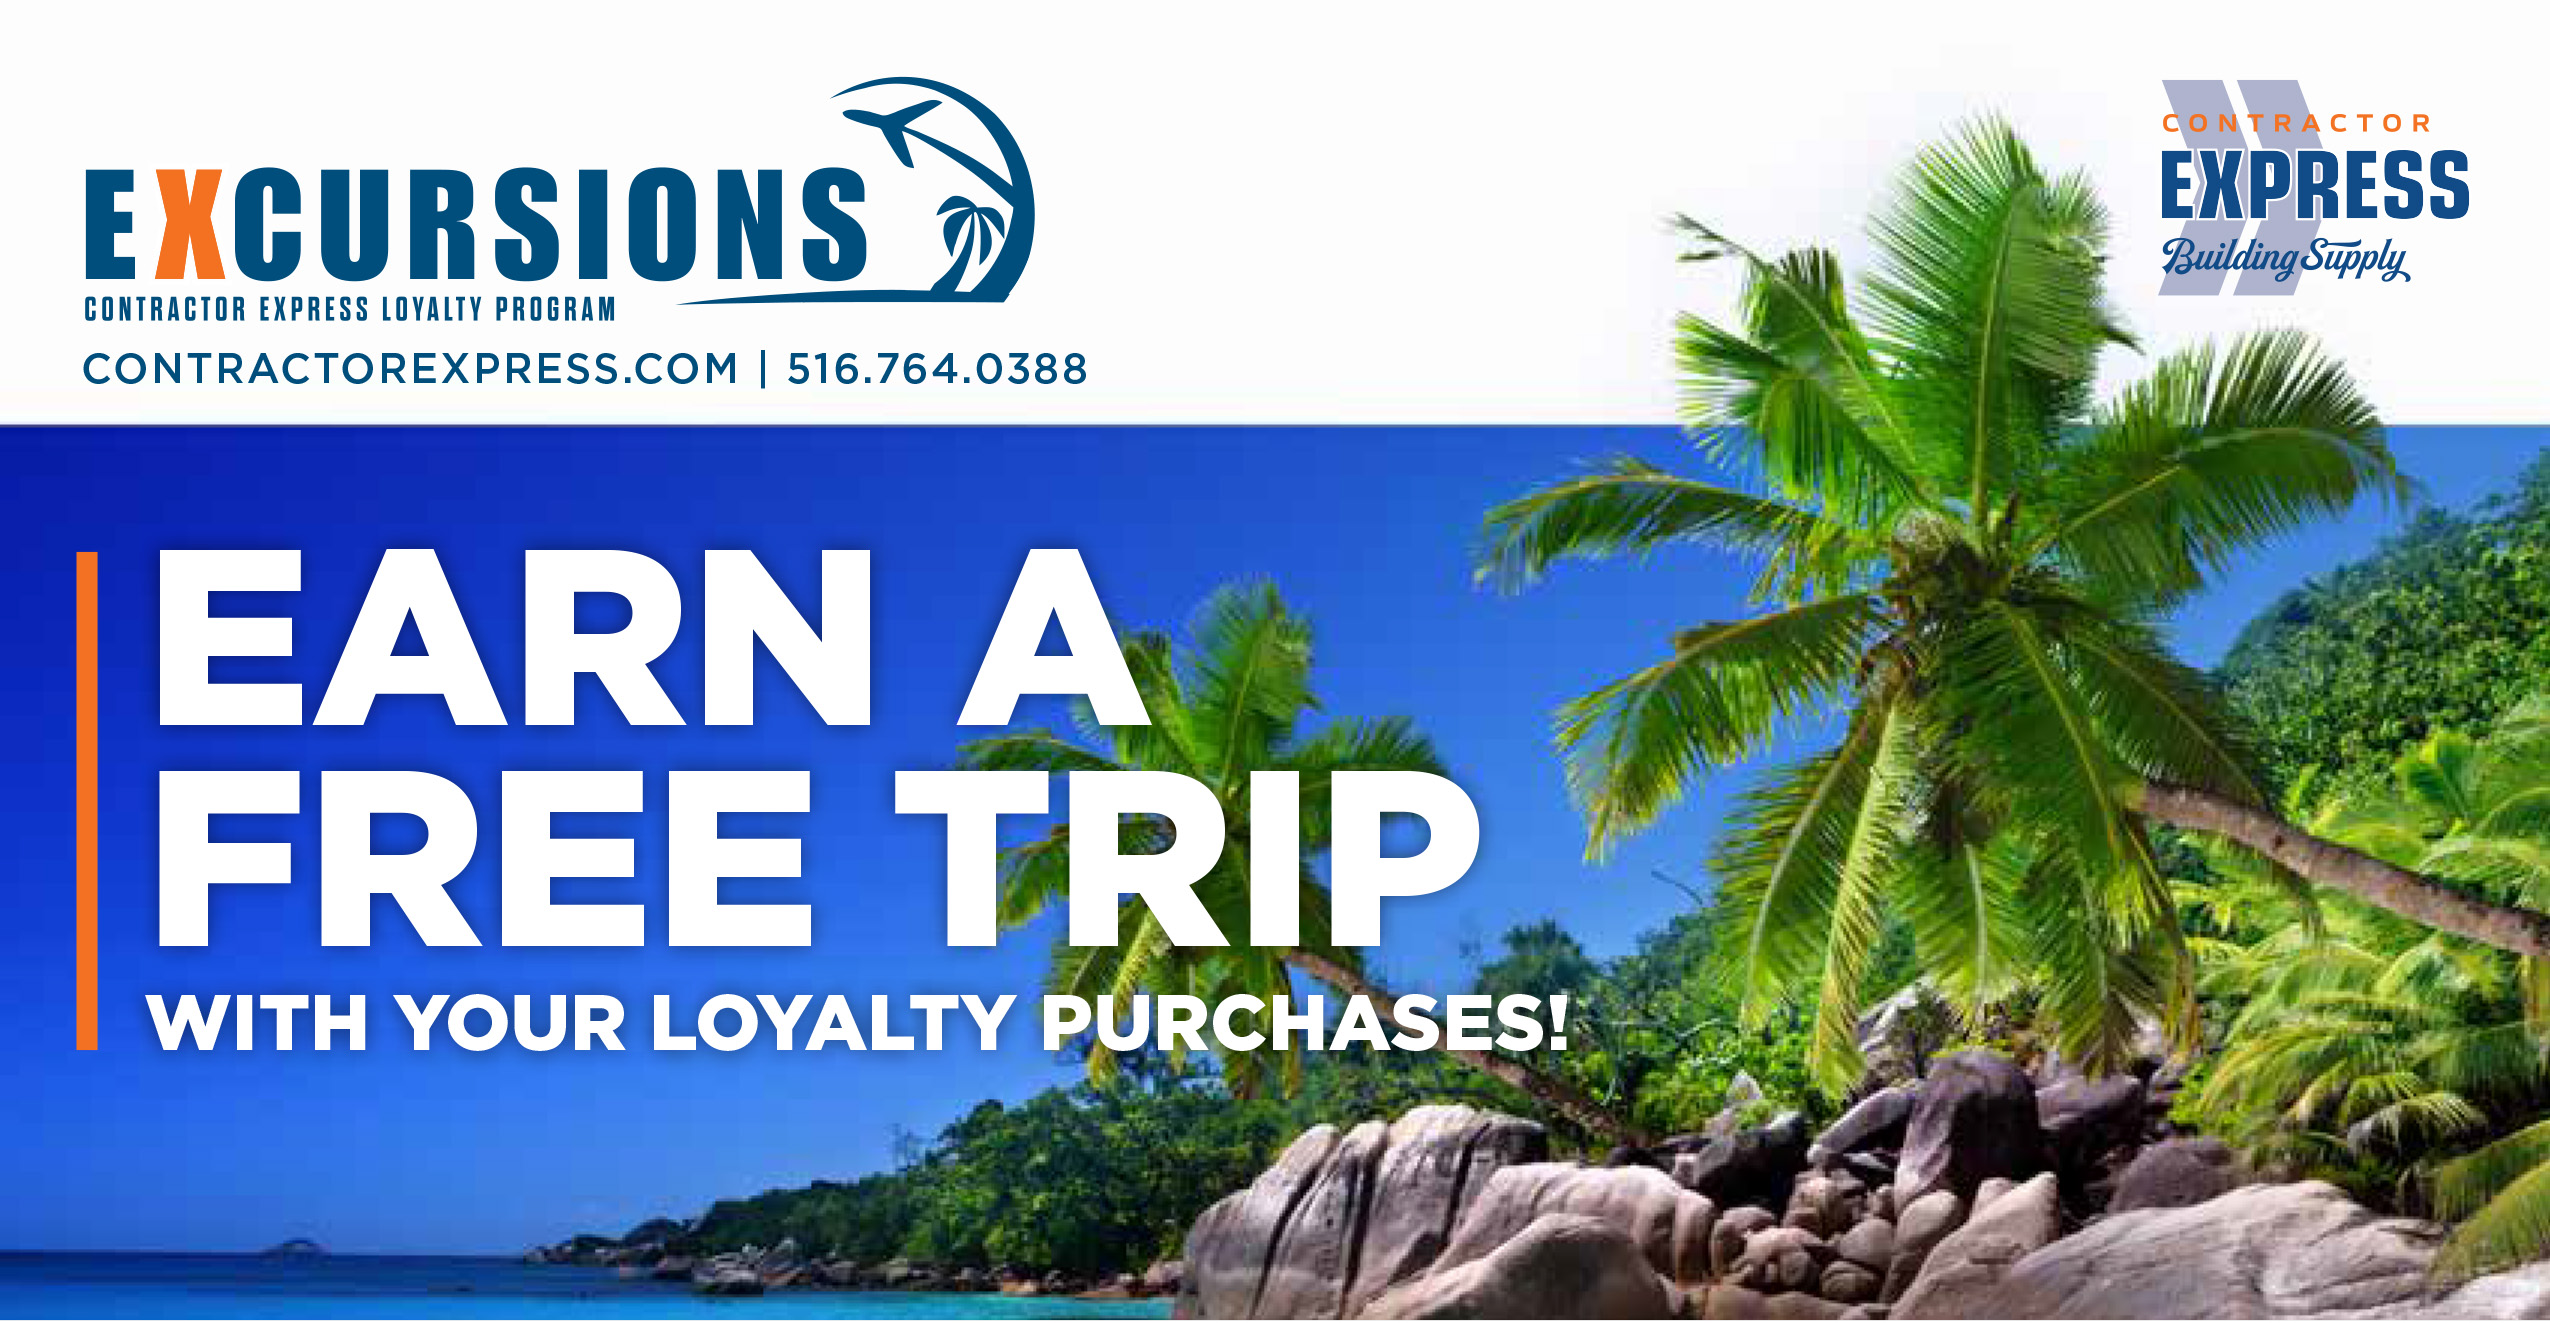 Earn A Free Trip With Your Loyalty Purchases!